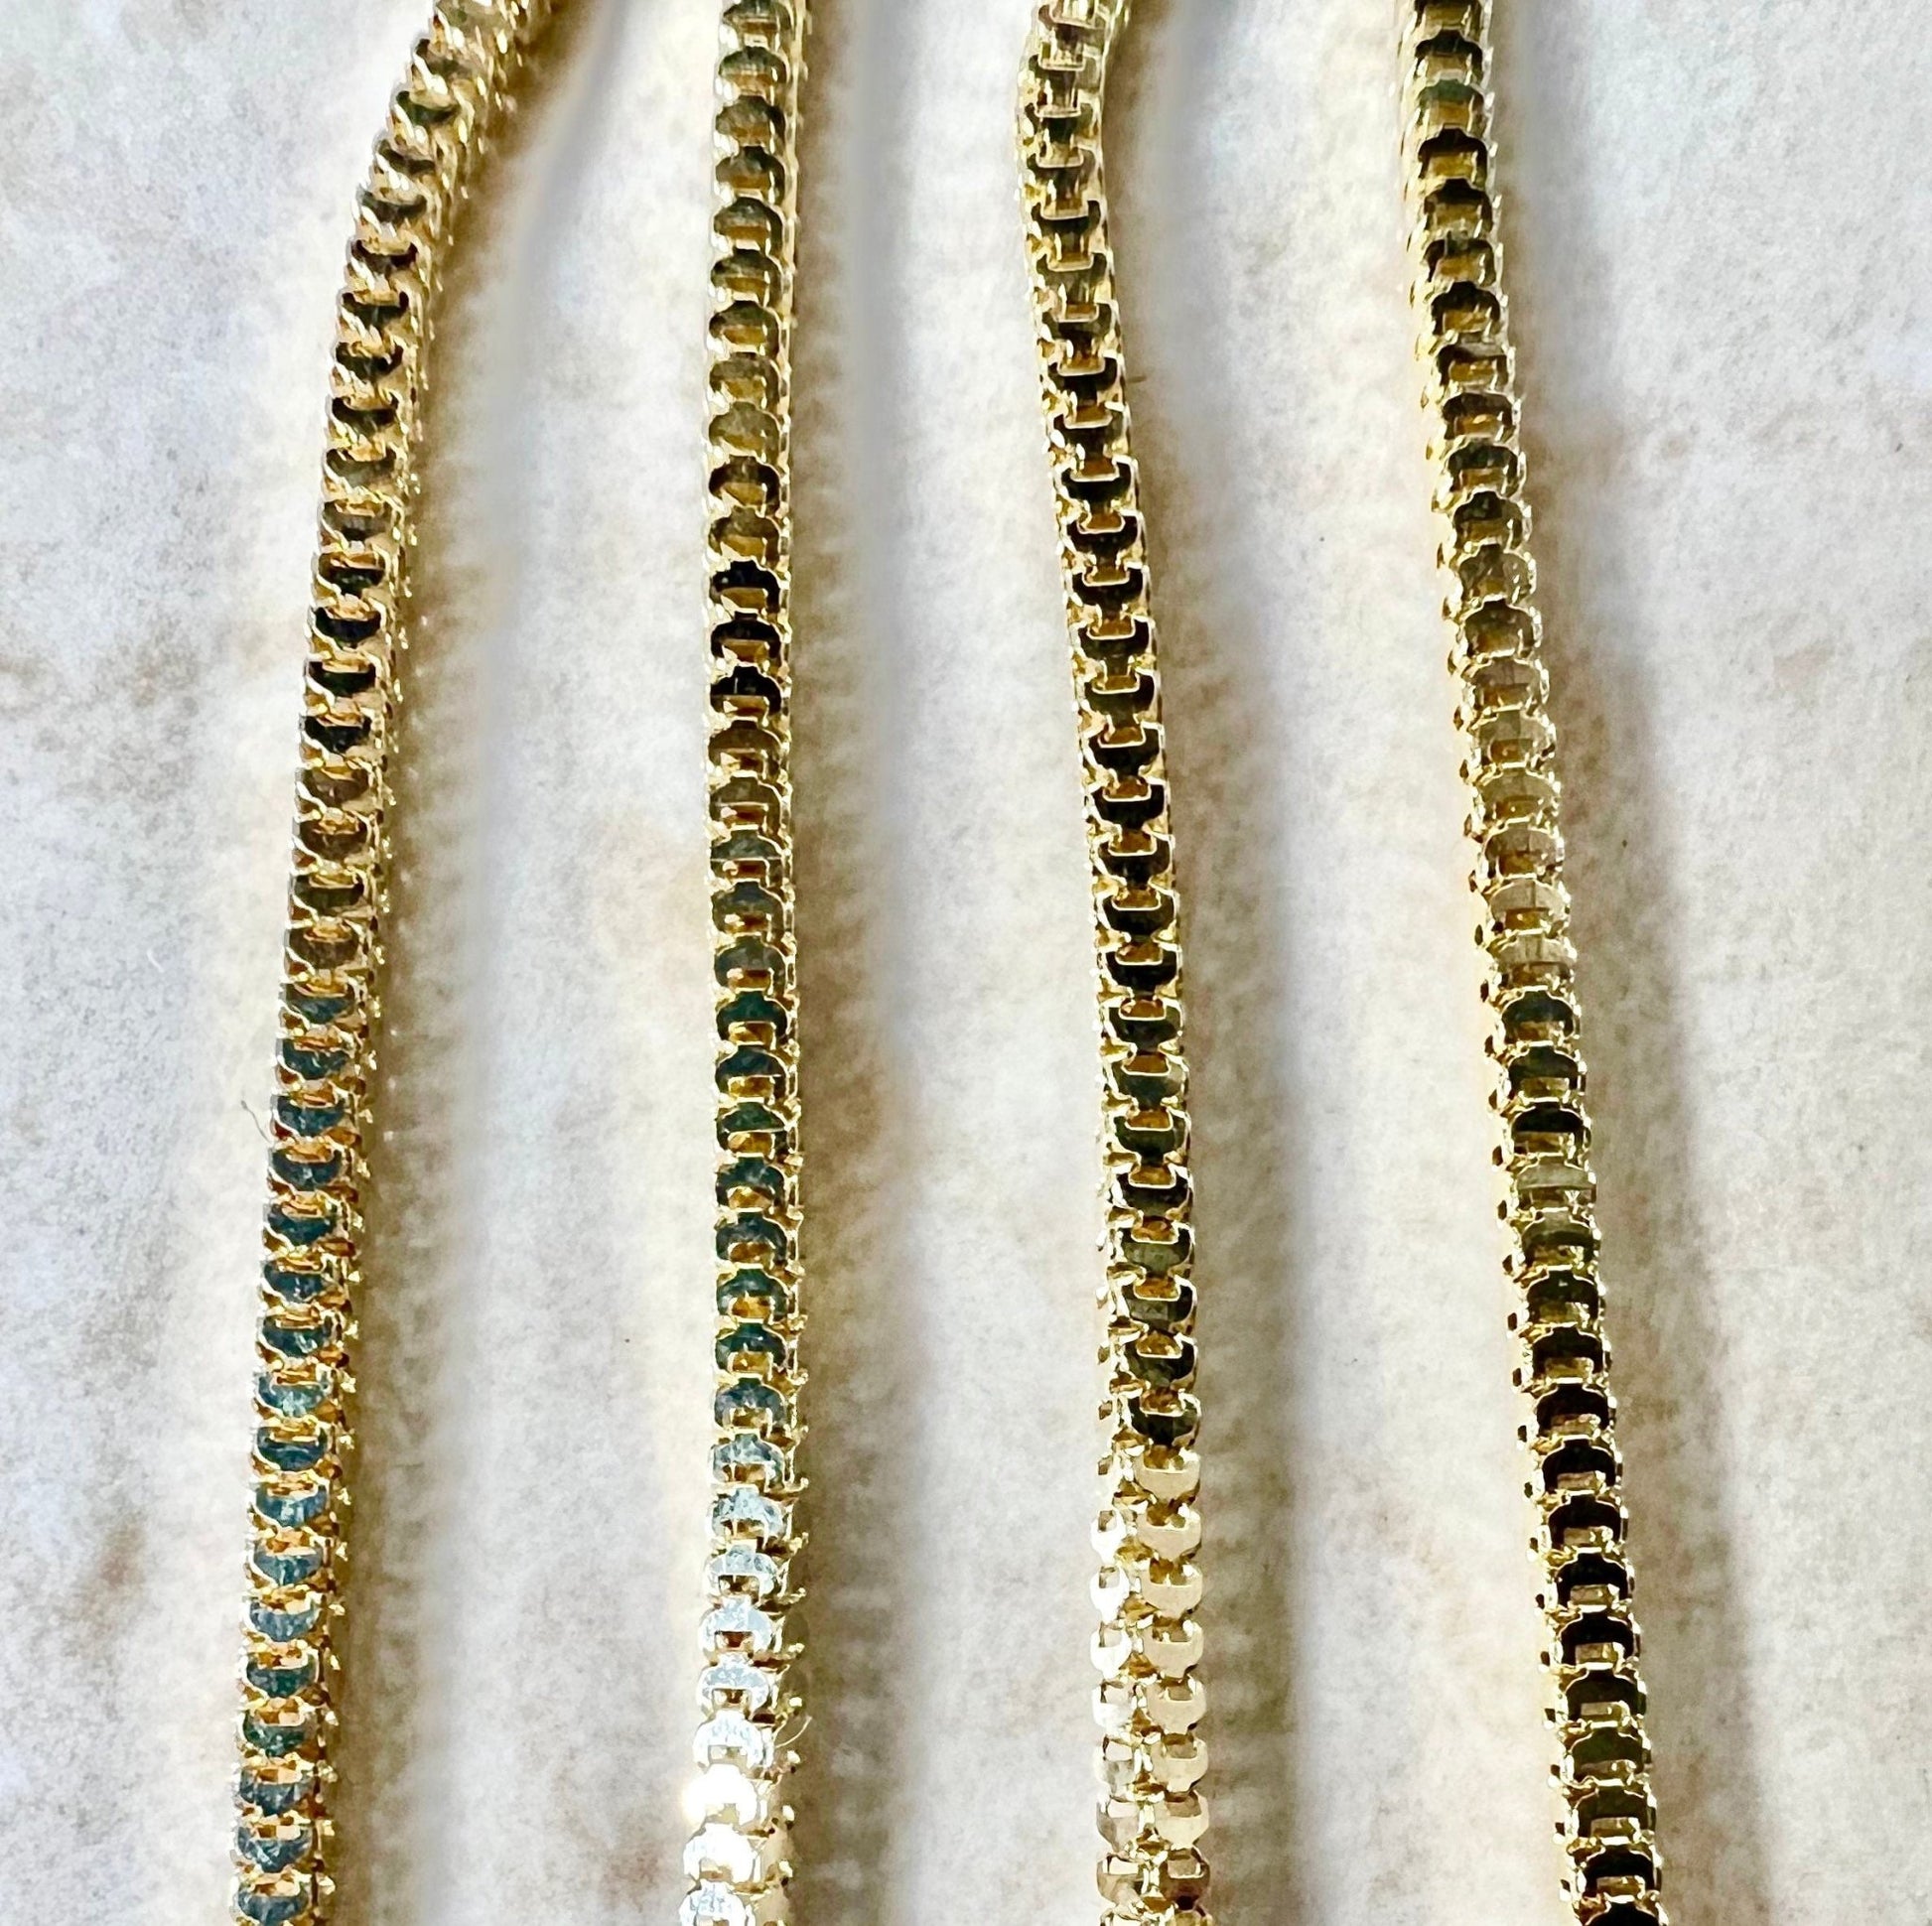 Vintage Italian 18 Karat Yellow Gold 17.75 Inches Box Chain Necklace